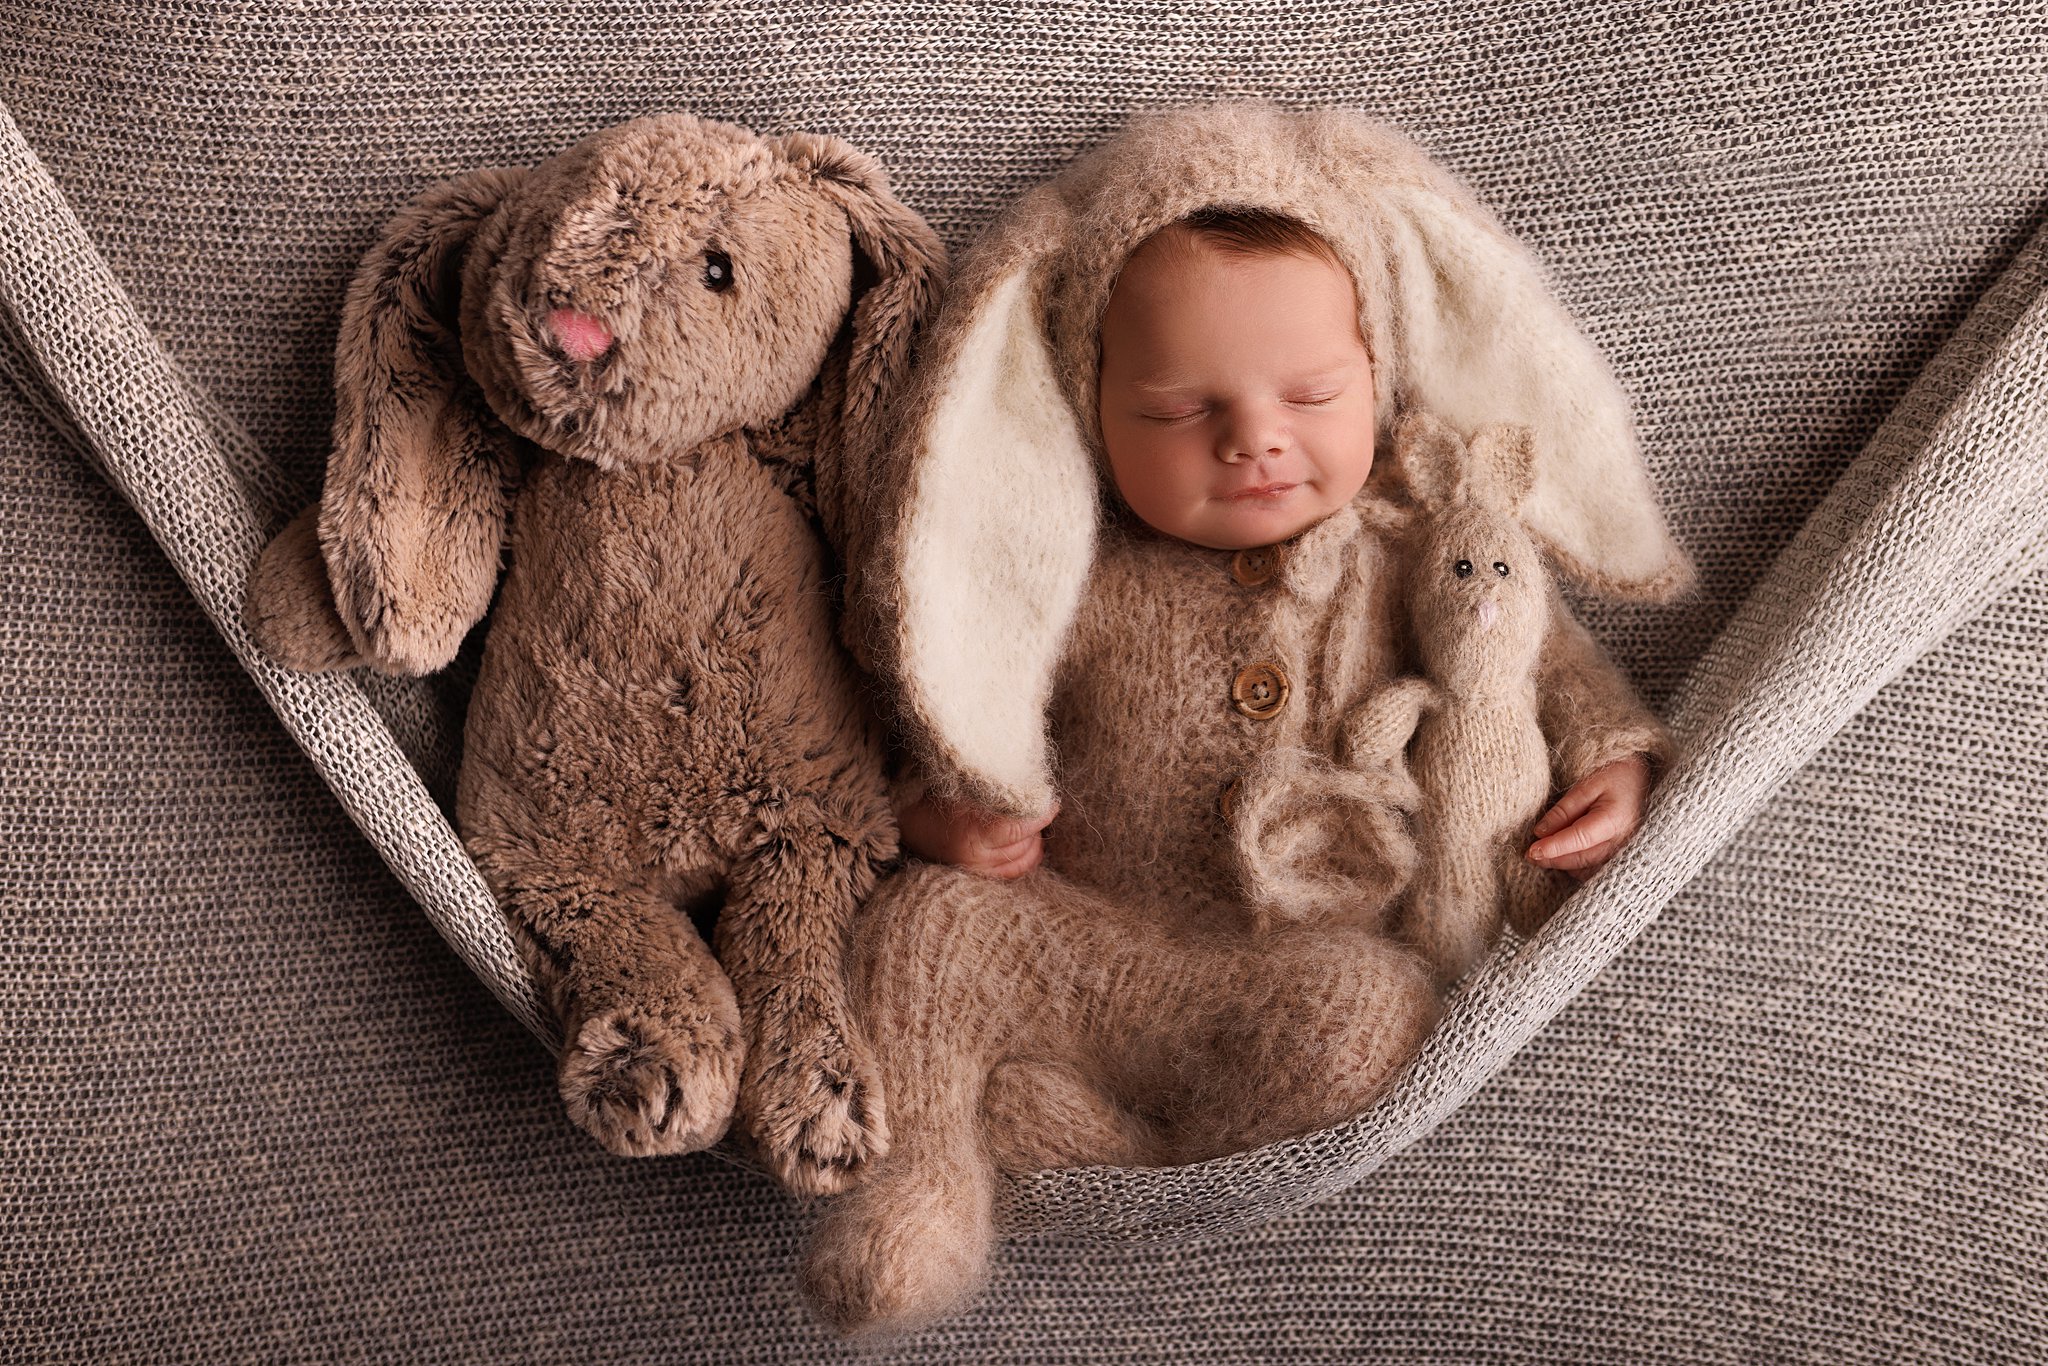 A newborn baby sitting on a knit sling sleeps wearing a brown knit bunny suit with a two stuffed bunnies of the same color baby furniture vaughan